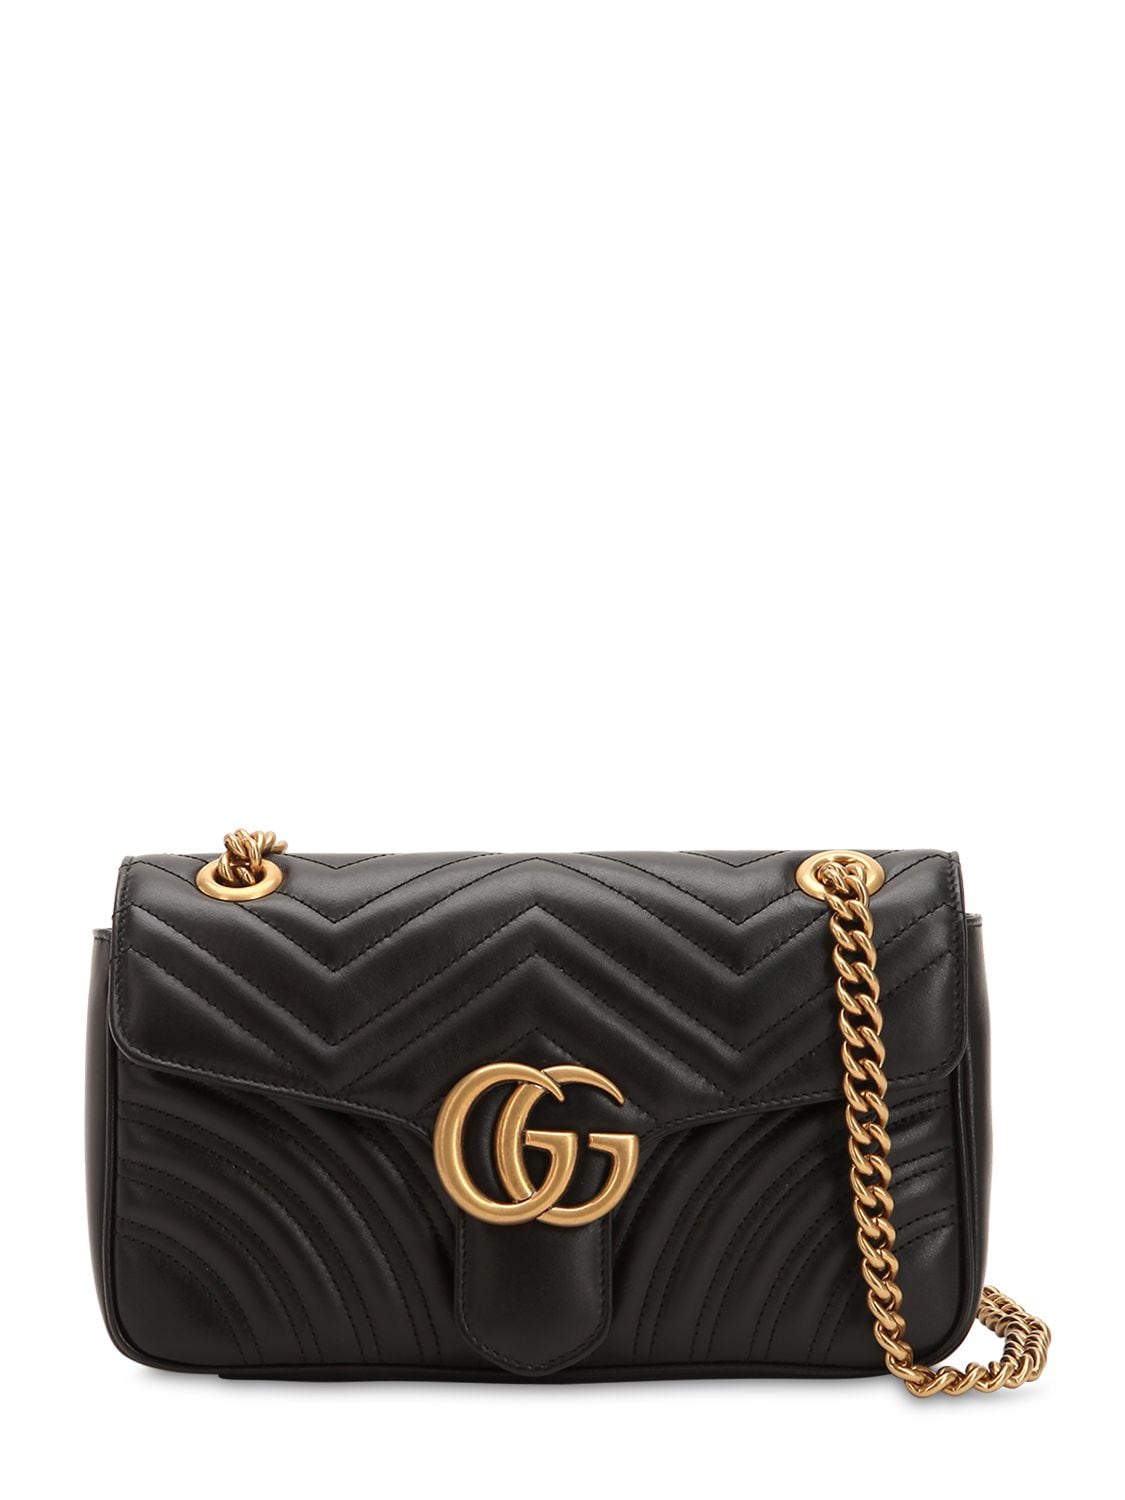 Gucci Small Gg Marmont 2.0 Leather Bag In Black